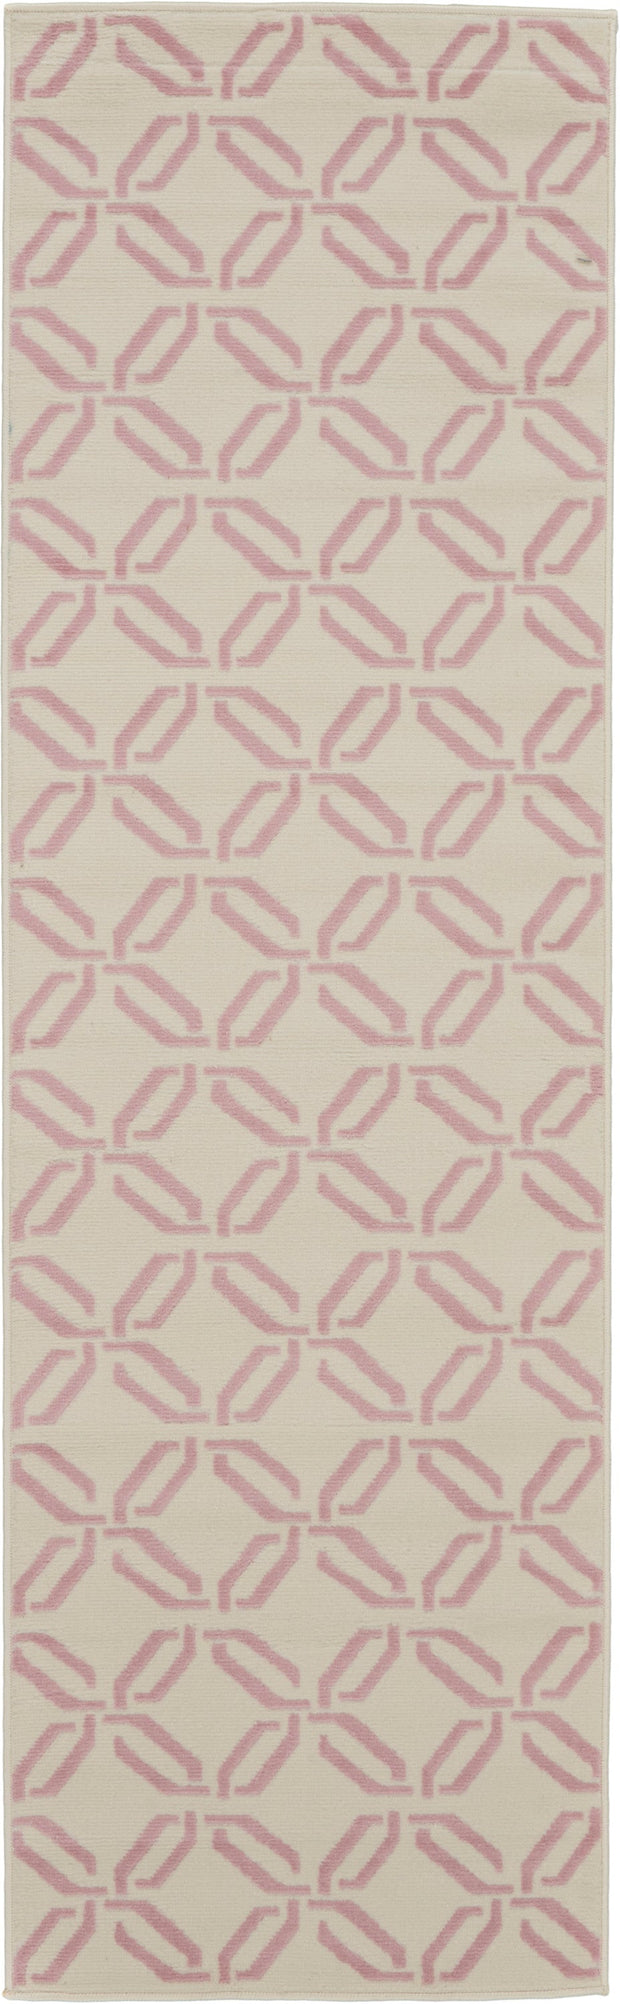 jubilant ivory pink rug by nourison 99446479549 redo 3